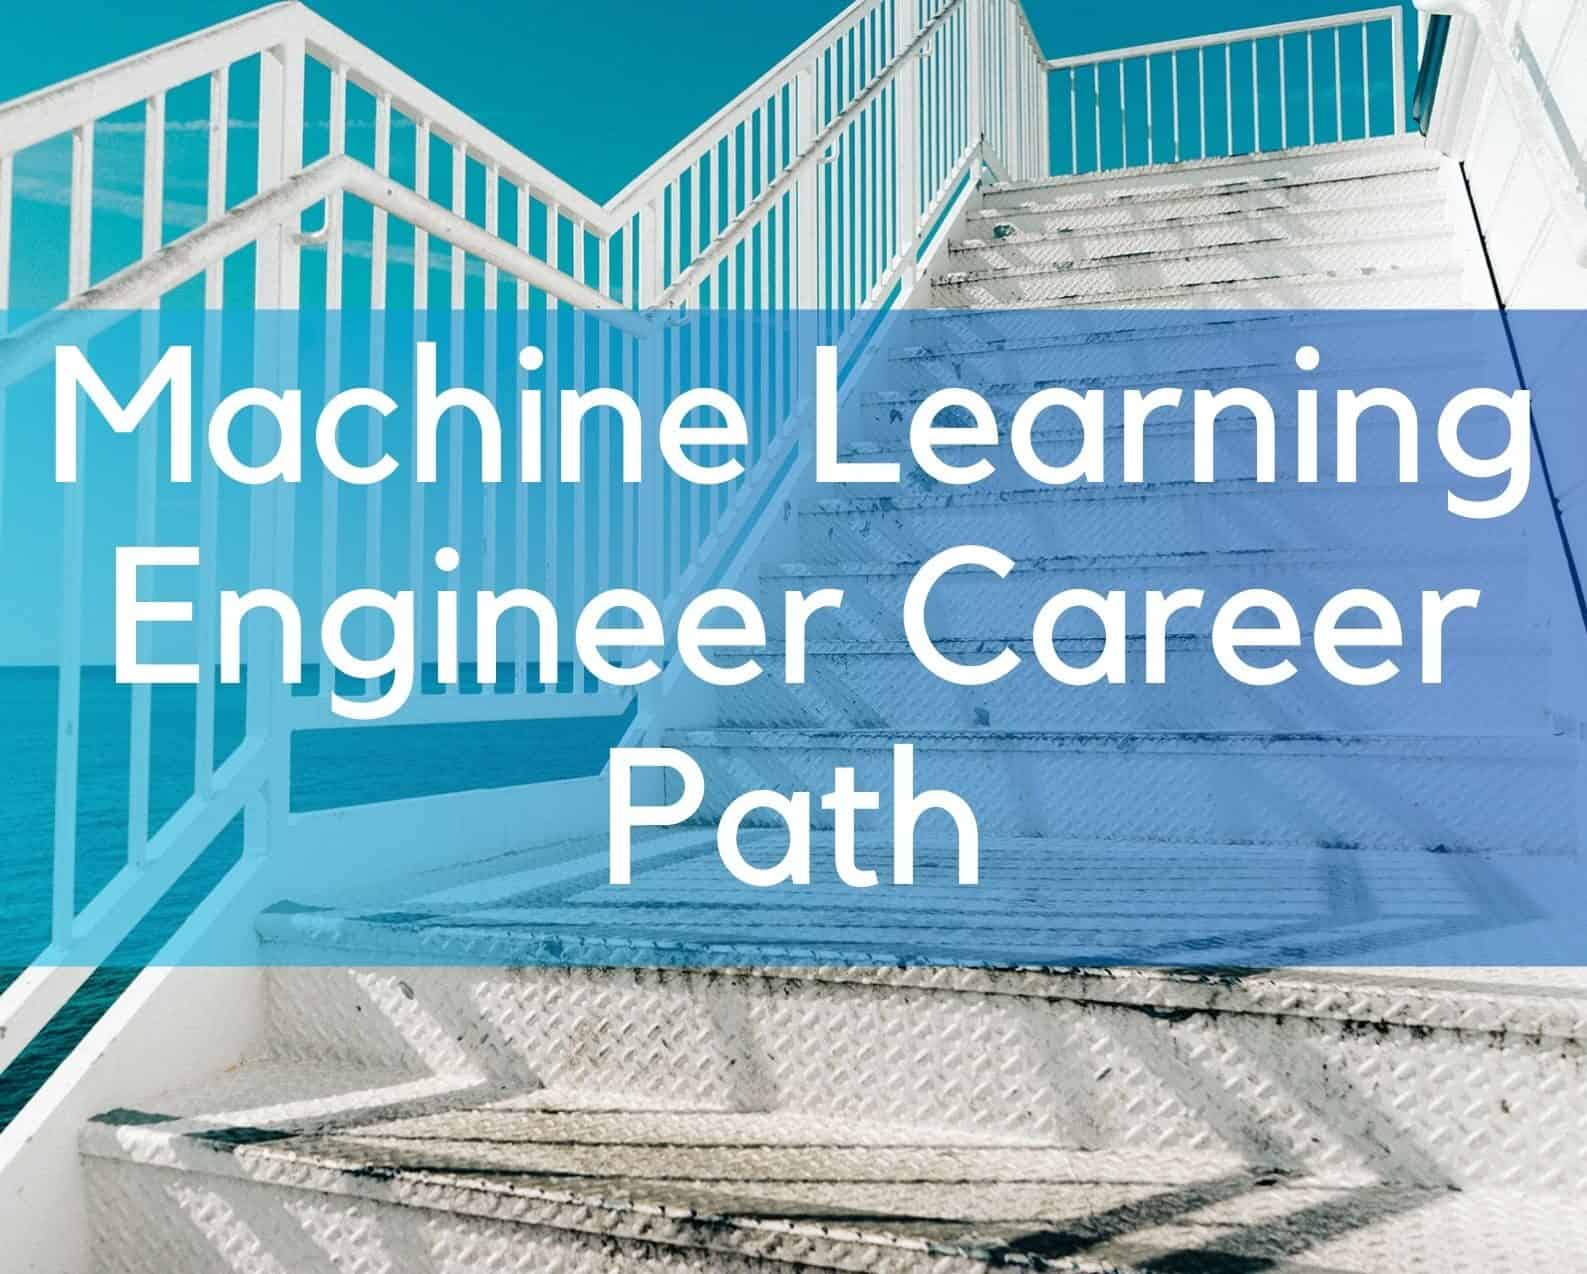 Machine Learning Engineer Career Path: Step by Step Complete Guide